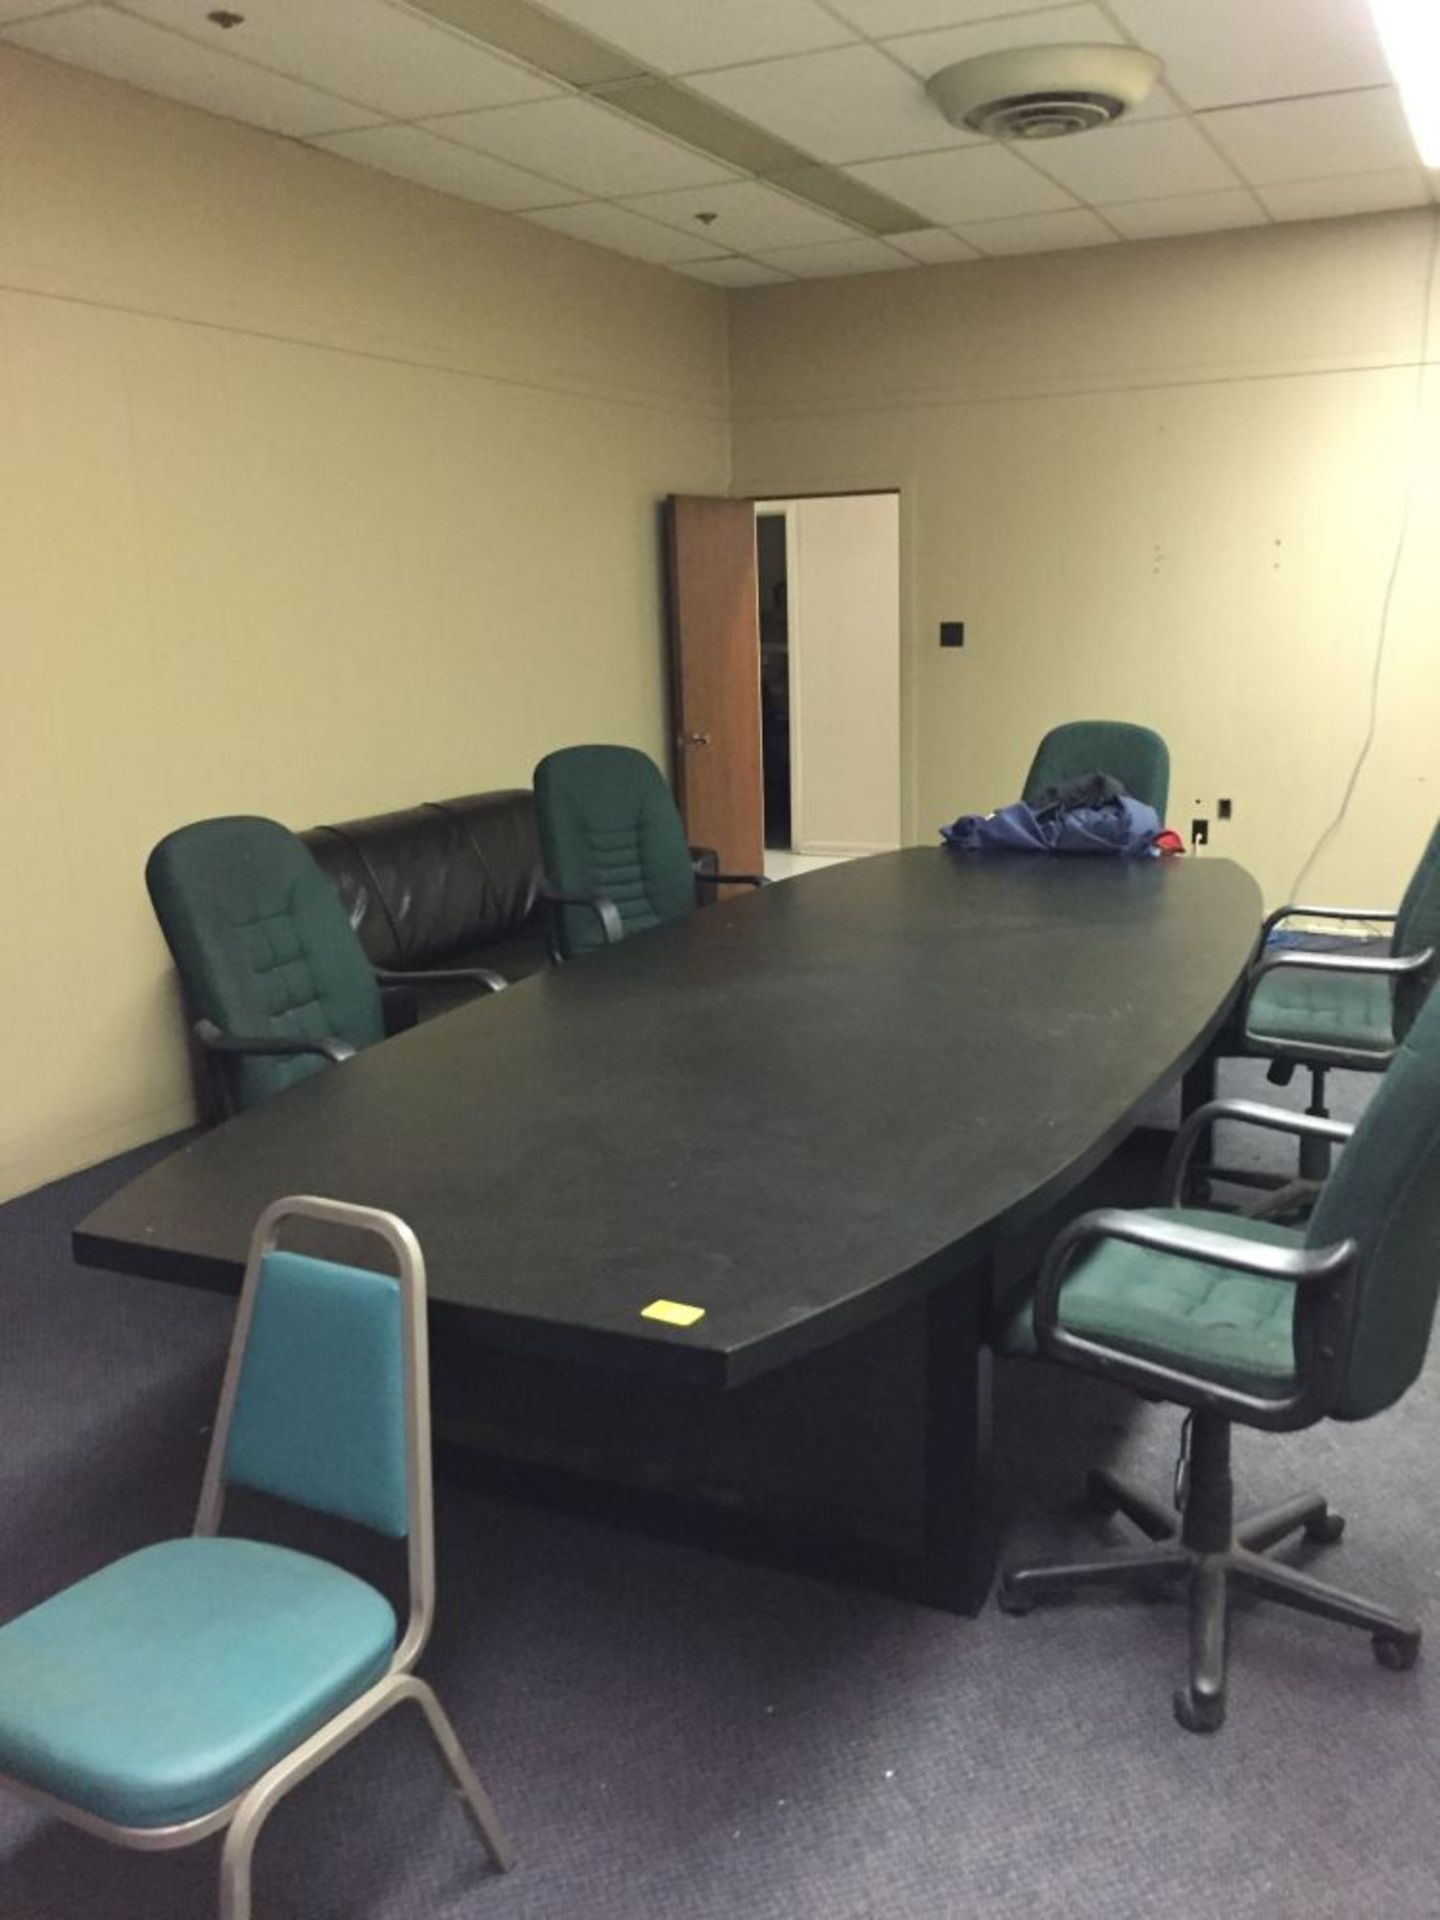 Conference Table & Chairs